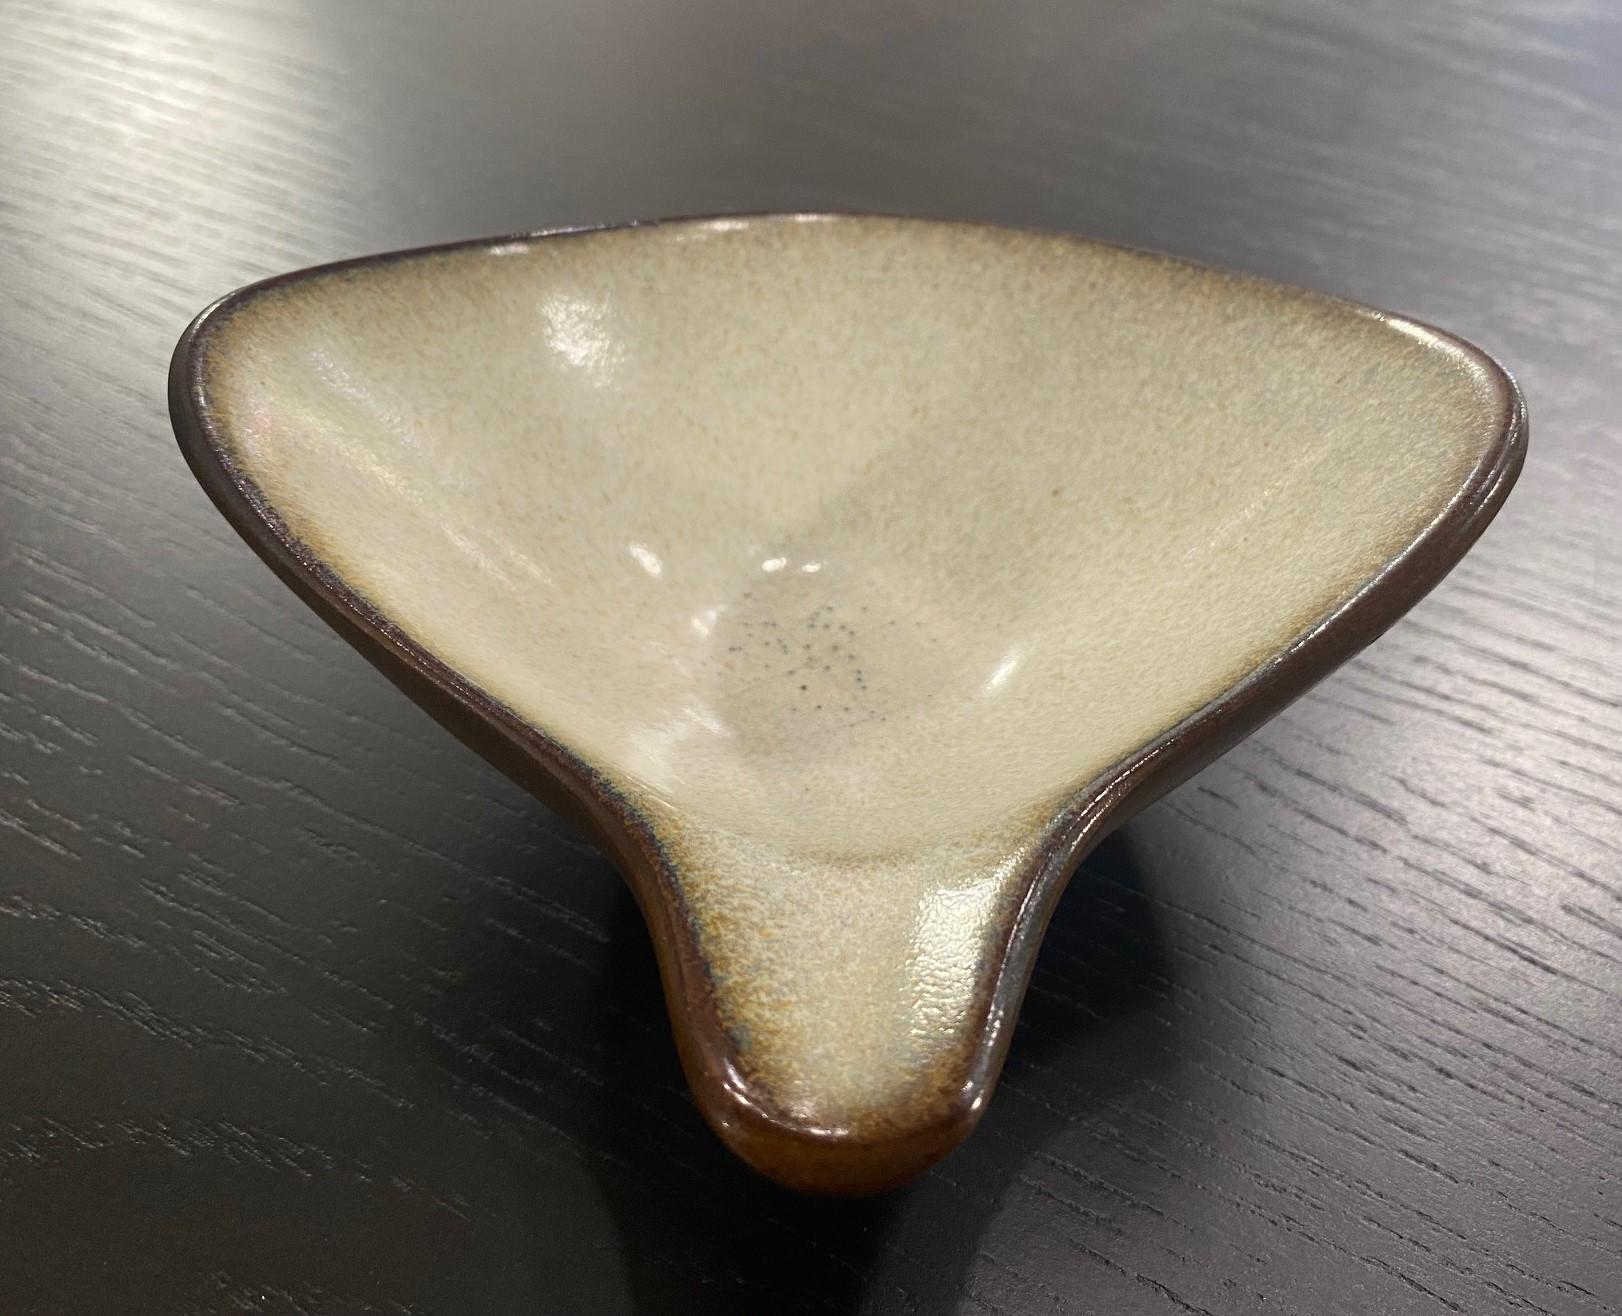 A gorgeously crafted, beautifully glazed, Mid-Century Modern curved bowl by California master ceramist Rupert Deese who worked closely with pottery legend Harrison Mcintosh.

Signed with Deese's cipher/ stamp on the base.

Would be a great